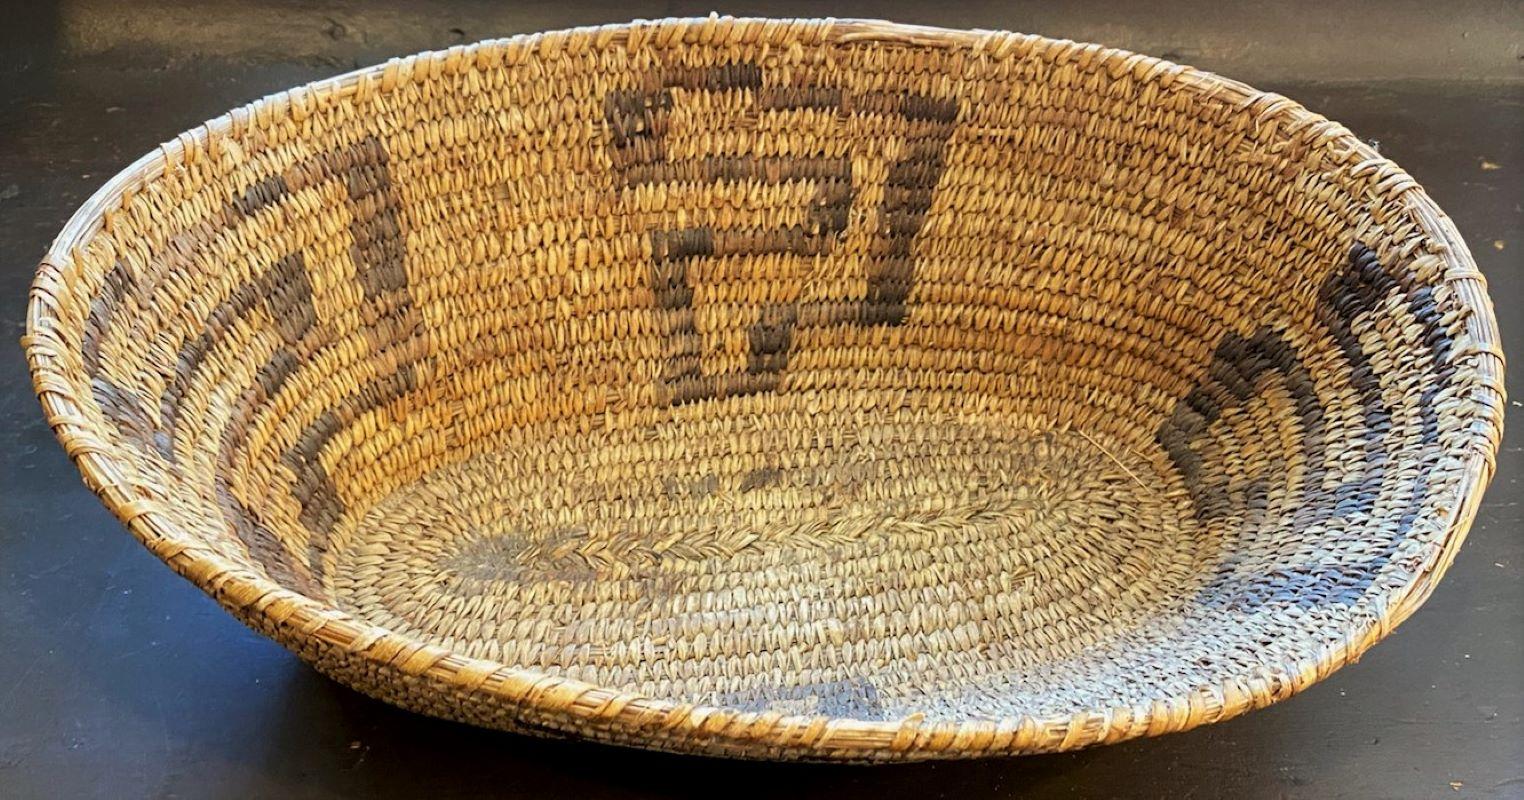 This fine papago Indian weaving basket isin good condition with minor wear on the top trim area in two spots. See pics. This is quite unusual the oval shape.